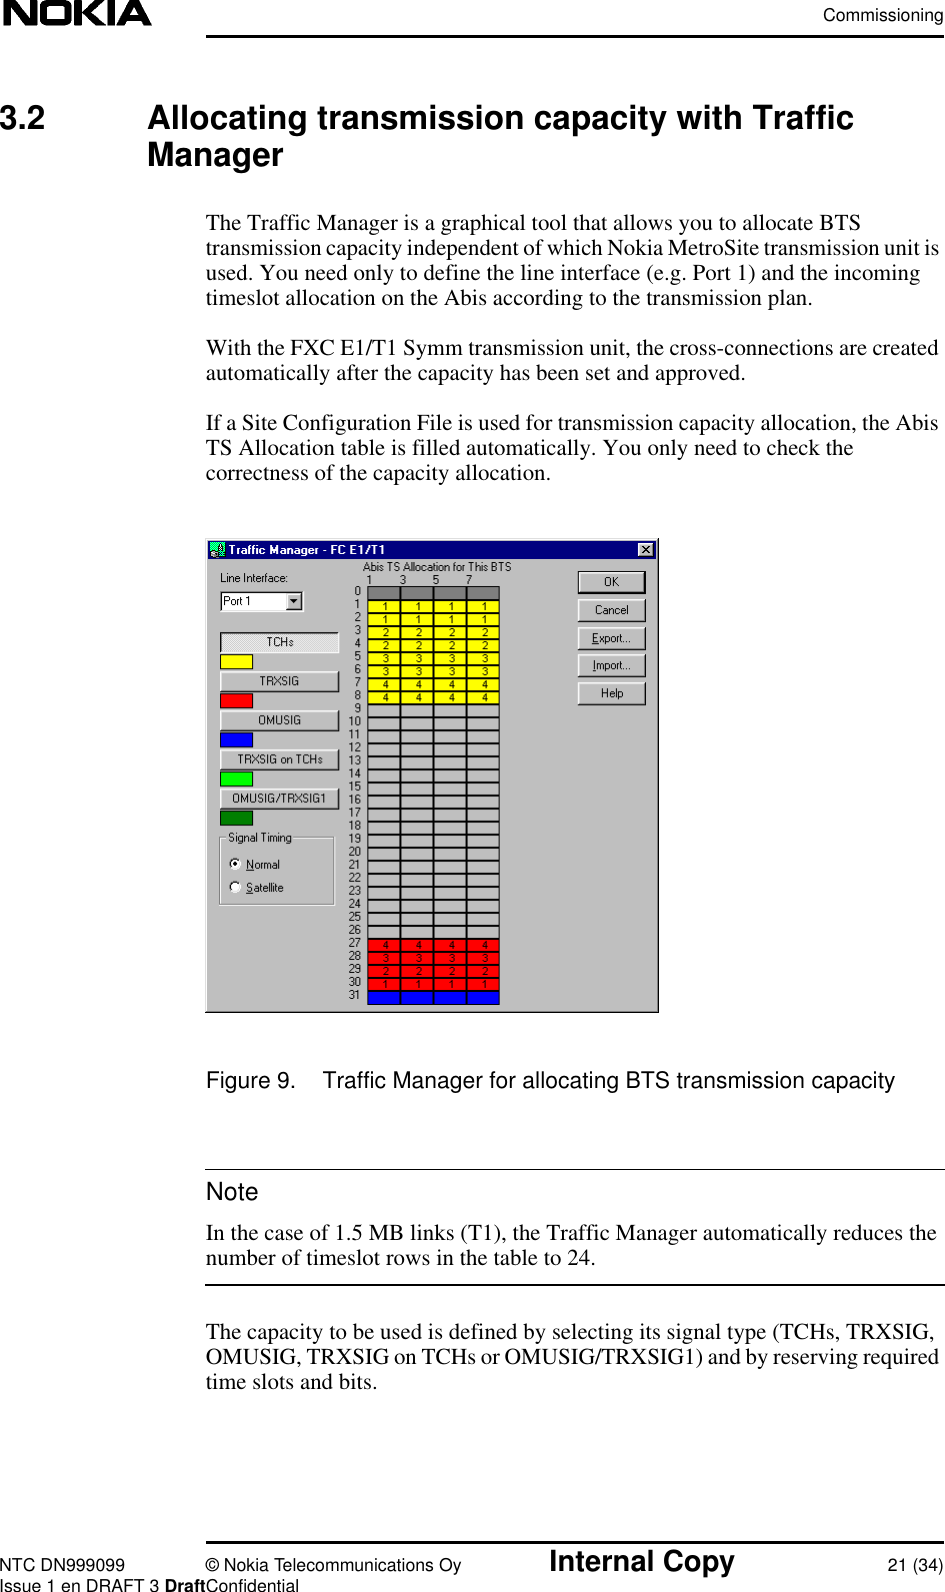 CommissioningNTC DN999099 © Nokia Telecommunications Oy Internal Copy 21 (34)Issue 1 en DRAFT 3 DraftConfidentialNote3.2 Allocating transmission capacity with TrafficManagerThe Traffic Manager is a graphical tool that allows you to allocate BTStransmission capacity independent of which Nokia MetroSite transmission unit isused. You need only to define the line interface (e.g. Port 1) and the incomingtimeslot allocation on the Abis according to the transmission plan.With the FXC E1/T1 Symm transmission unit, the cross-connections are createdautomatically after the capacity has been set and approved.If a Site Configuration File is used for transmission capacity allocation, the AbisTS Allocation table is filled automatically. You only need to check thecorrectness of the capacity allocation.Figure 9. Traffic Manager for allocating BTS transmission capacityIn the case of 1.5 MB links (T1), the Traffic Manager automatically reduces thenumber of timeslot rows in the table to 24.The capacity to be used is defined by selecting its signal type (TCHs, TRXSIG,OMUSIG, TRXSIG on TCHs or OMUSIG/TRXSIG1) and by reserving requiredtime slots and bits.